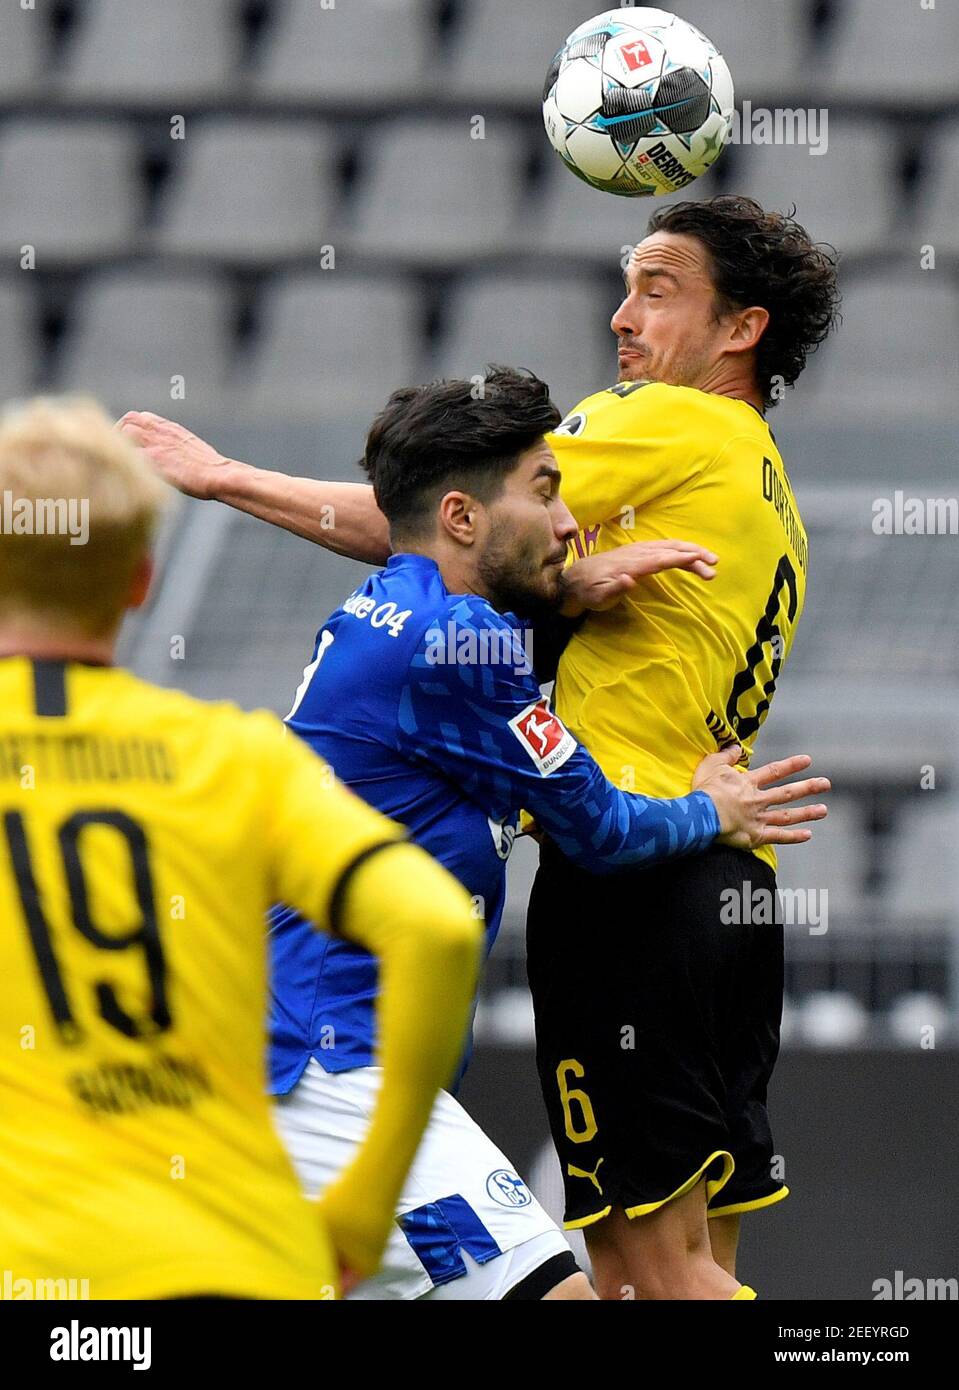 Soccer Football - Bundesliga - Borussia Dortmund v Schalke 04 - Signal Iduna Park, Dortmund, Germany - May 16, 2020 Dortmund's Thomas Delaney in action with Schalke's Suat Serdar, as play resumes behind closed doors following the outbreak of the coronavirus disease (COVID-19) Martin Meissner/Pool via REUTERS  DFL regulations prohibit any use of photographs as image sequences and/or quasi-video Stock Photo